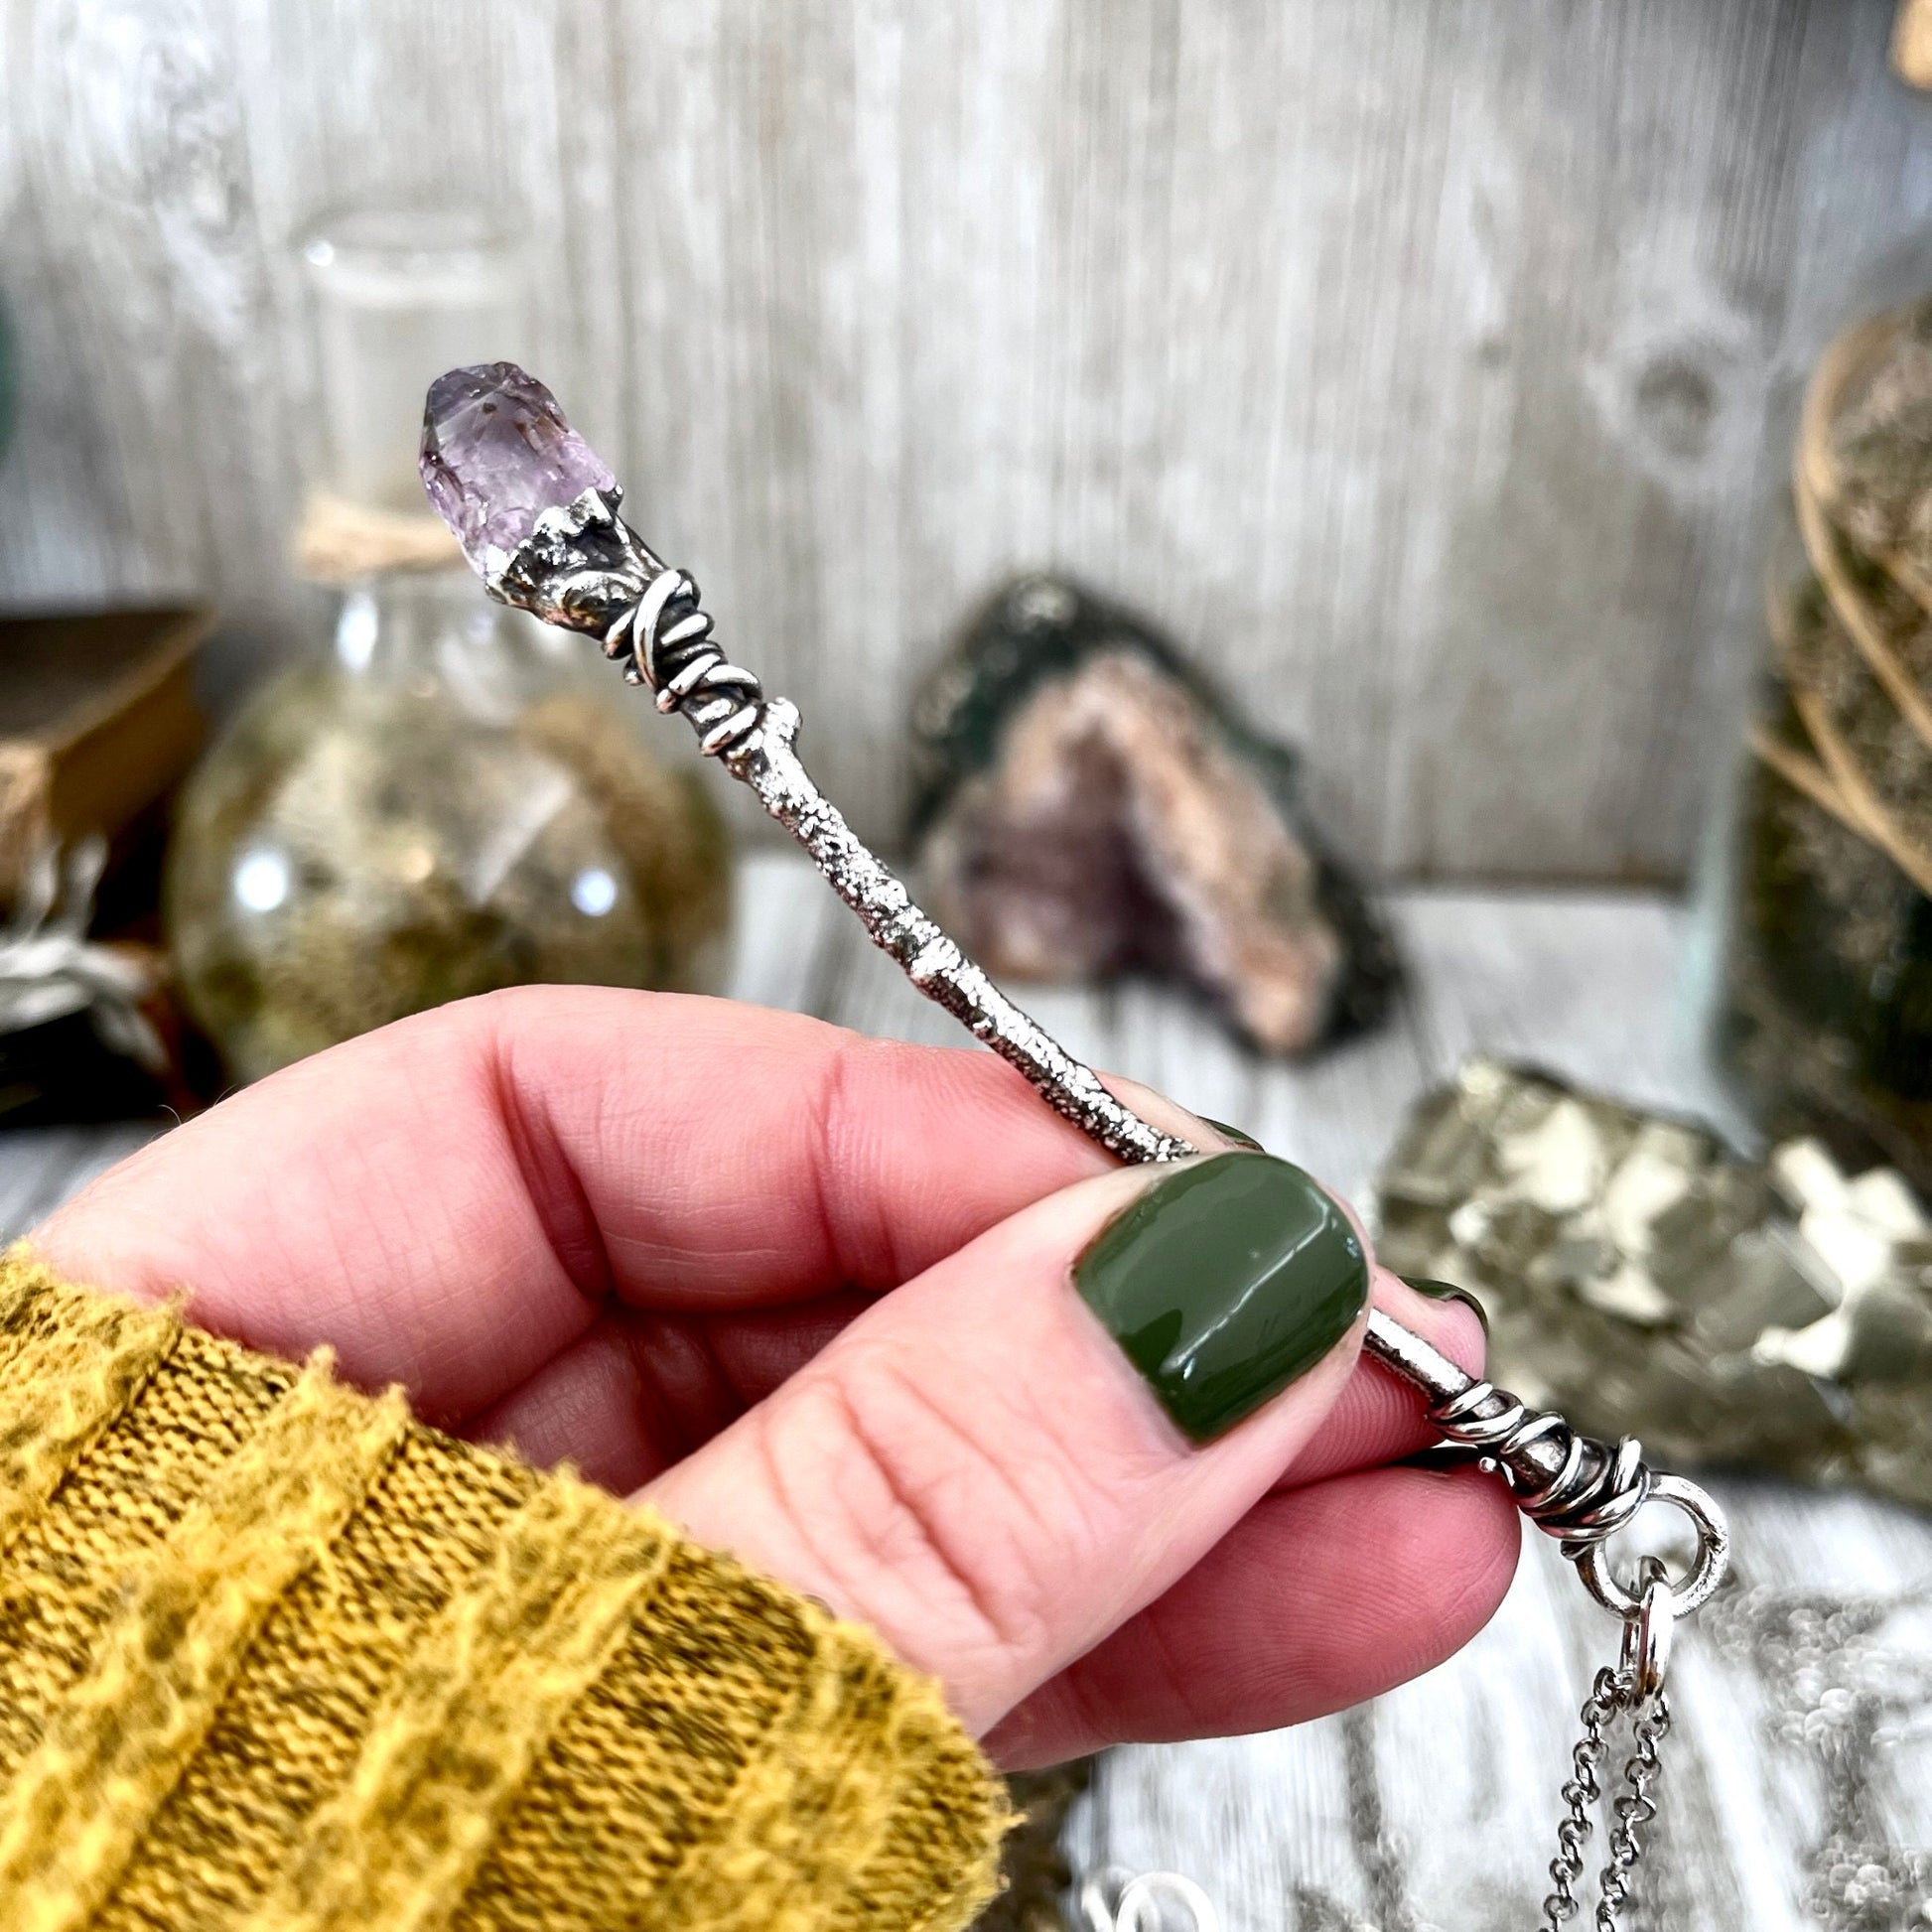 Clear Quartz Jewelry, Crystal Necklaces, Crystal Wand, Crystal Wizard Wand, electroformed, Etsy ID: 1587040348, FOXLARK- NECKLACES, Gothic Jewelry, Halloween Jewelry, Jewelry, Necklaces, Raw Amethyst, Raw Crystal Jewelry, Raw Crystal Necklace, Raw Quartz